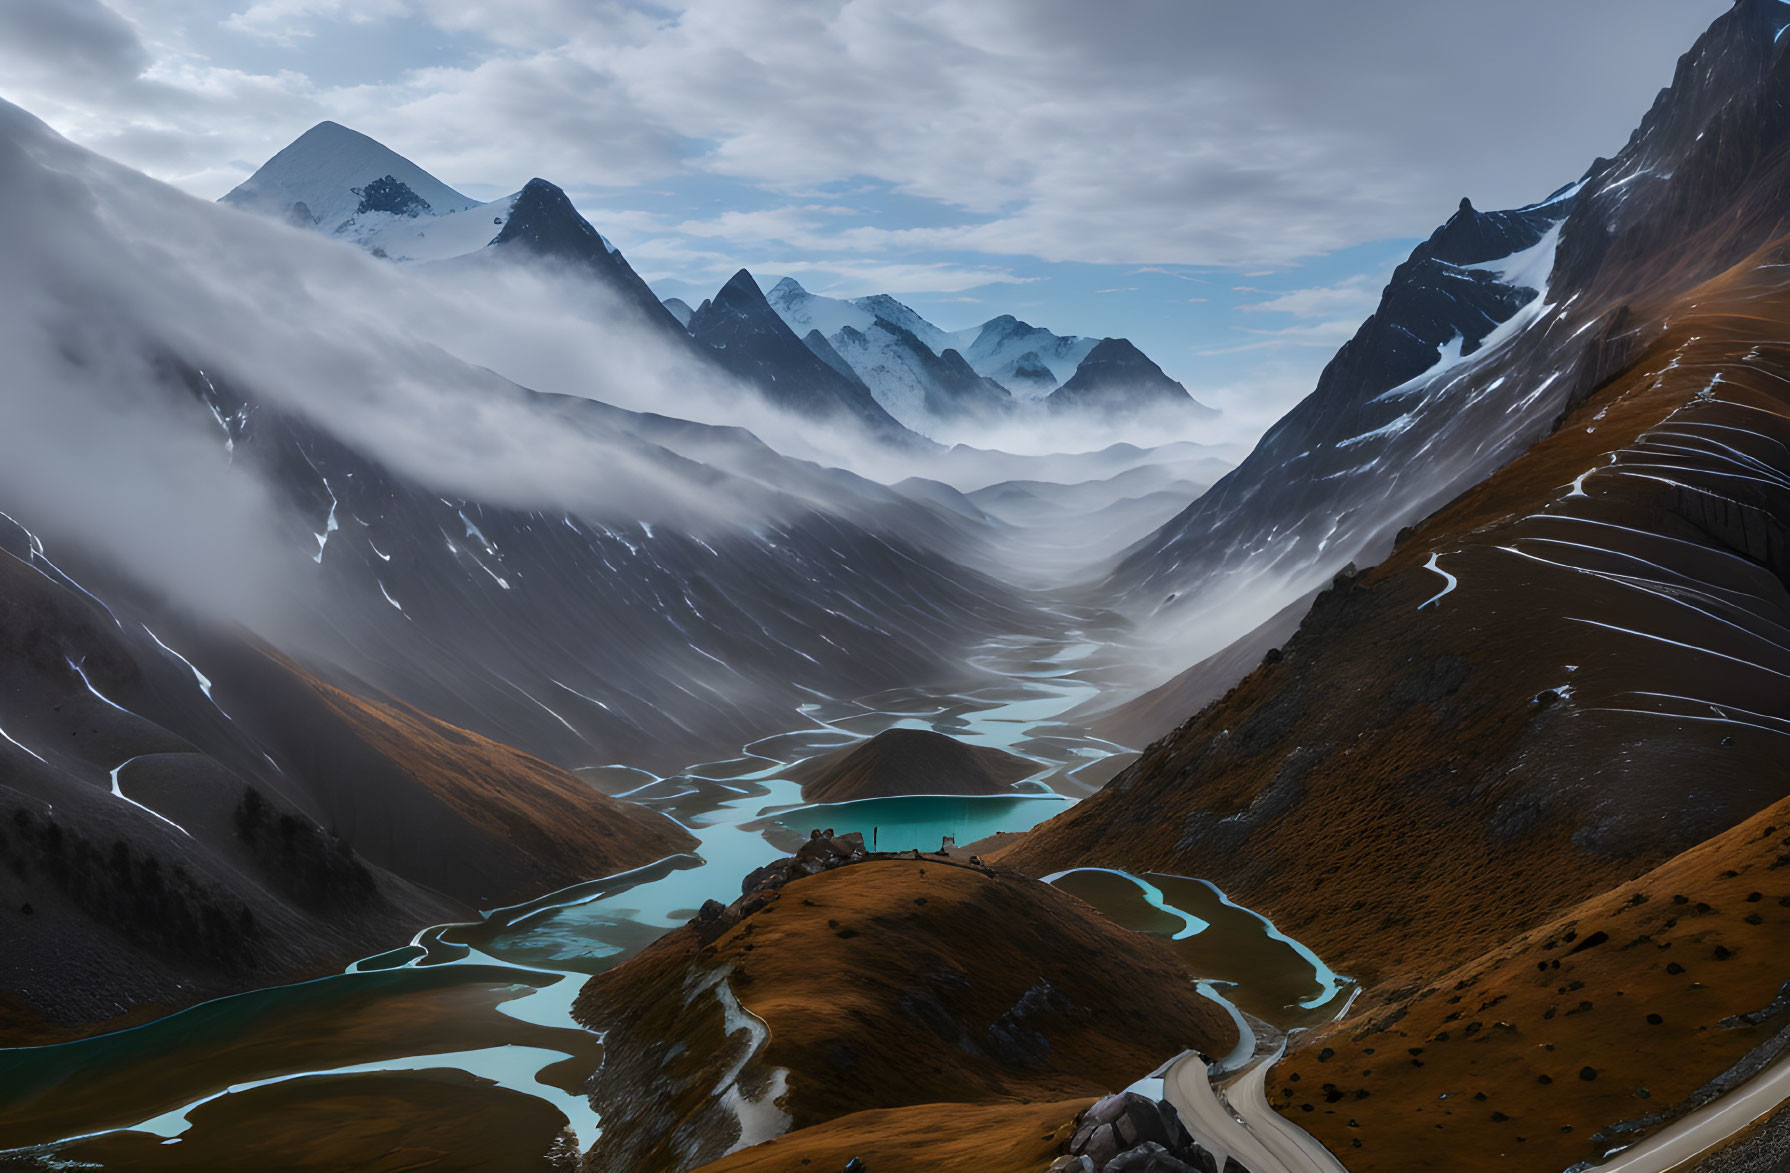 Majestic mountain landscape with winding river and mist-covered valley